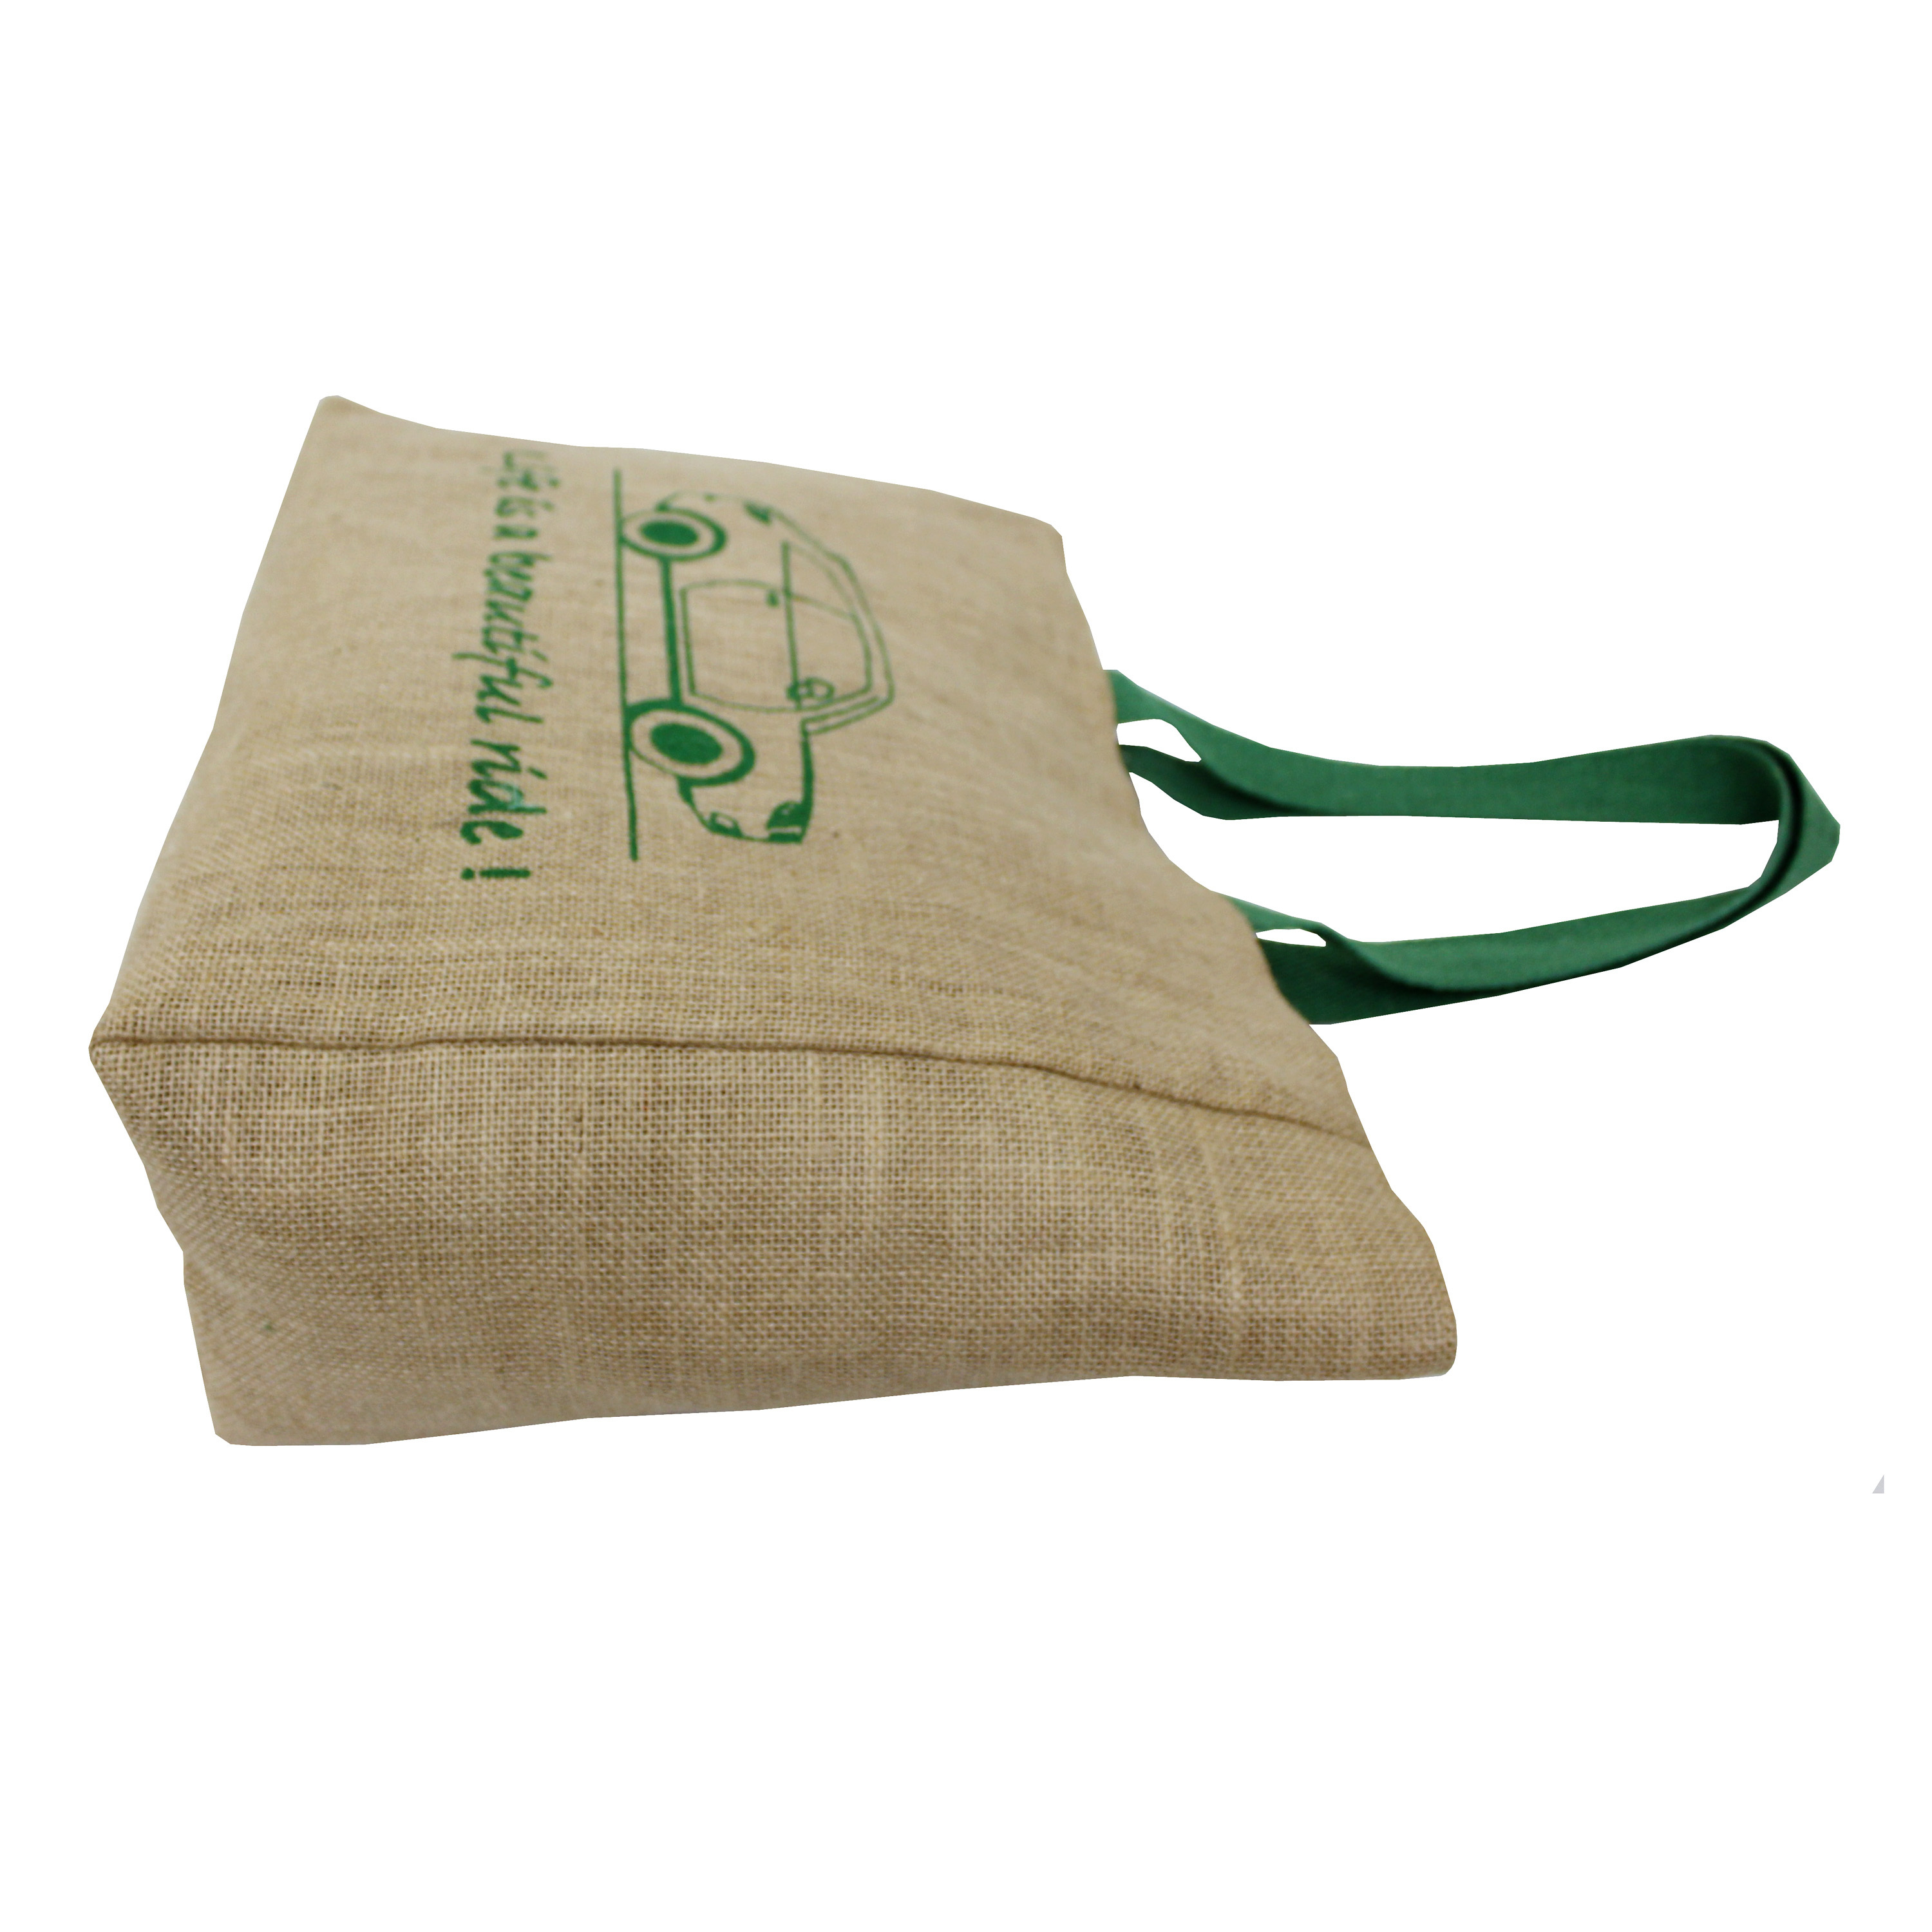 Non Laminated Jute Tote Bag With Inside Poly/Viscose Lining